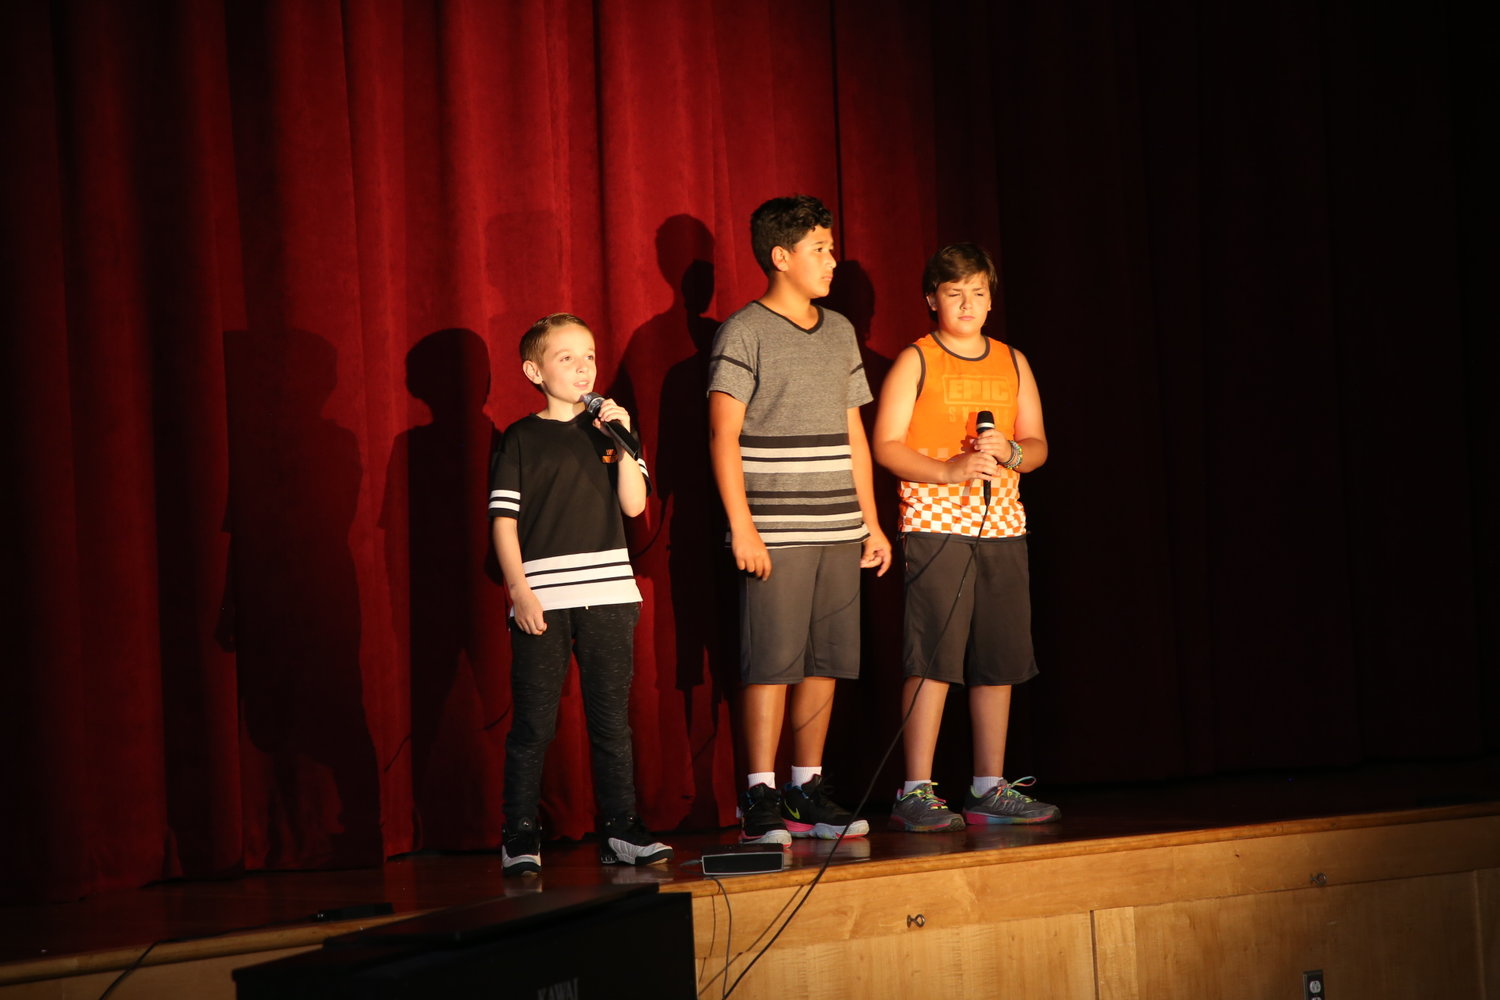 Isaiah Campos, Giovanni Fiorenza, and Tyler Hayes – Sang “Wrong” by Luh Kel